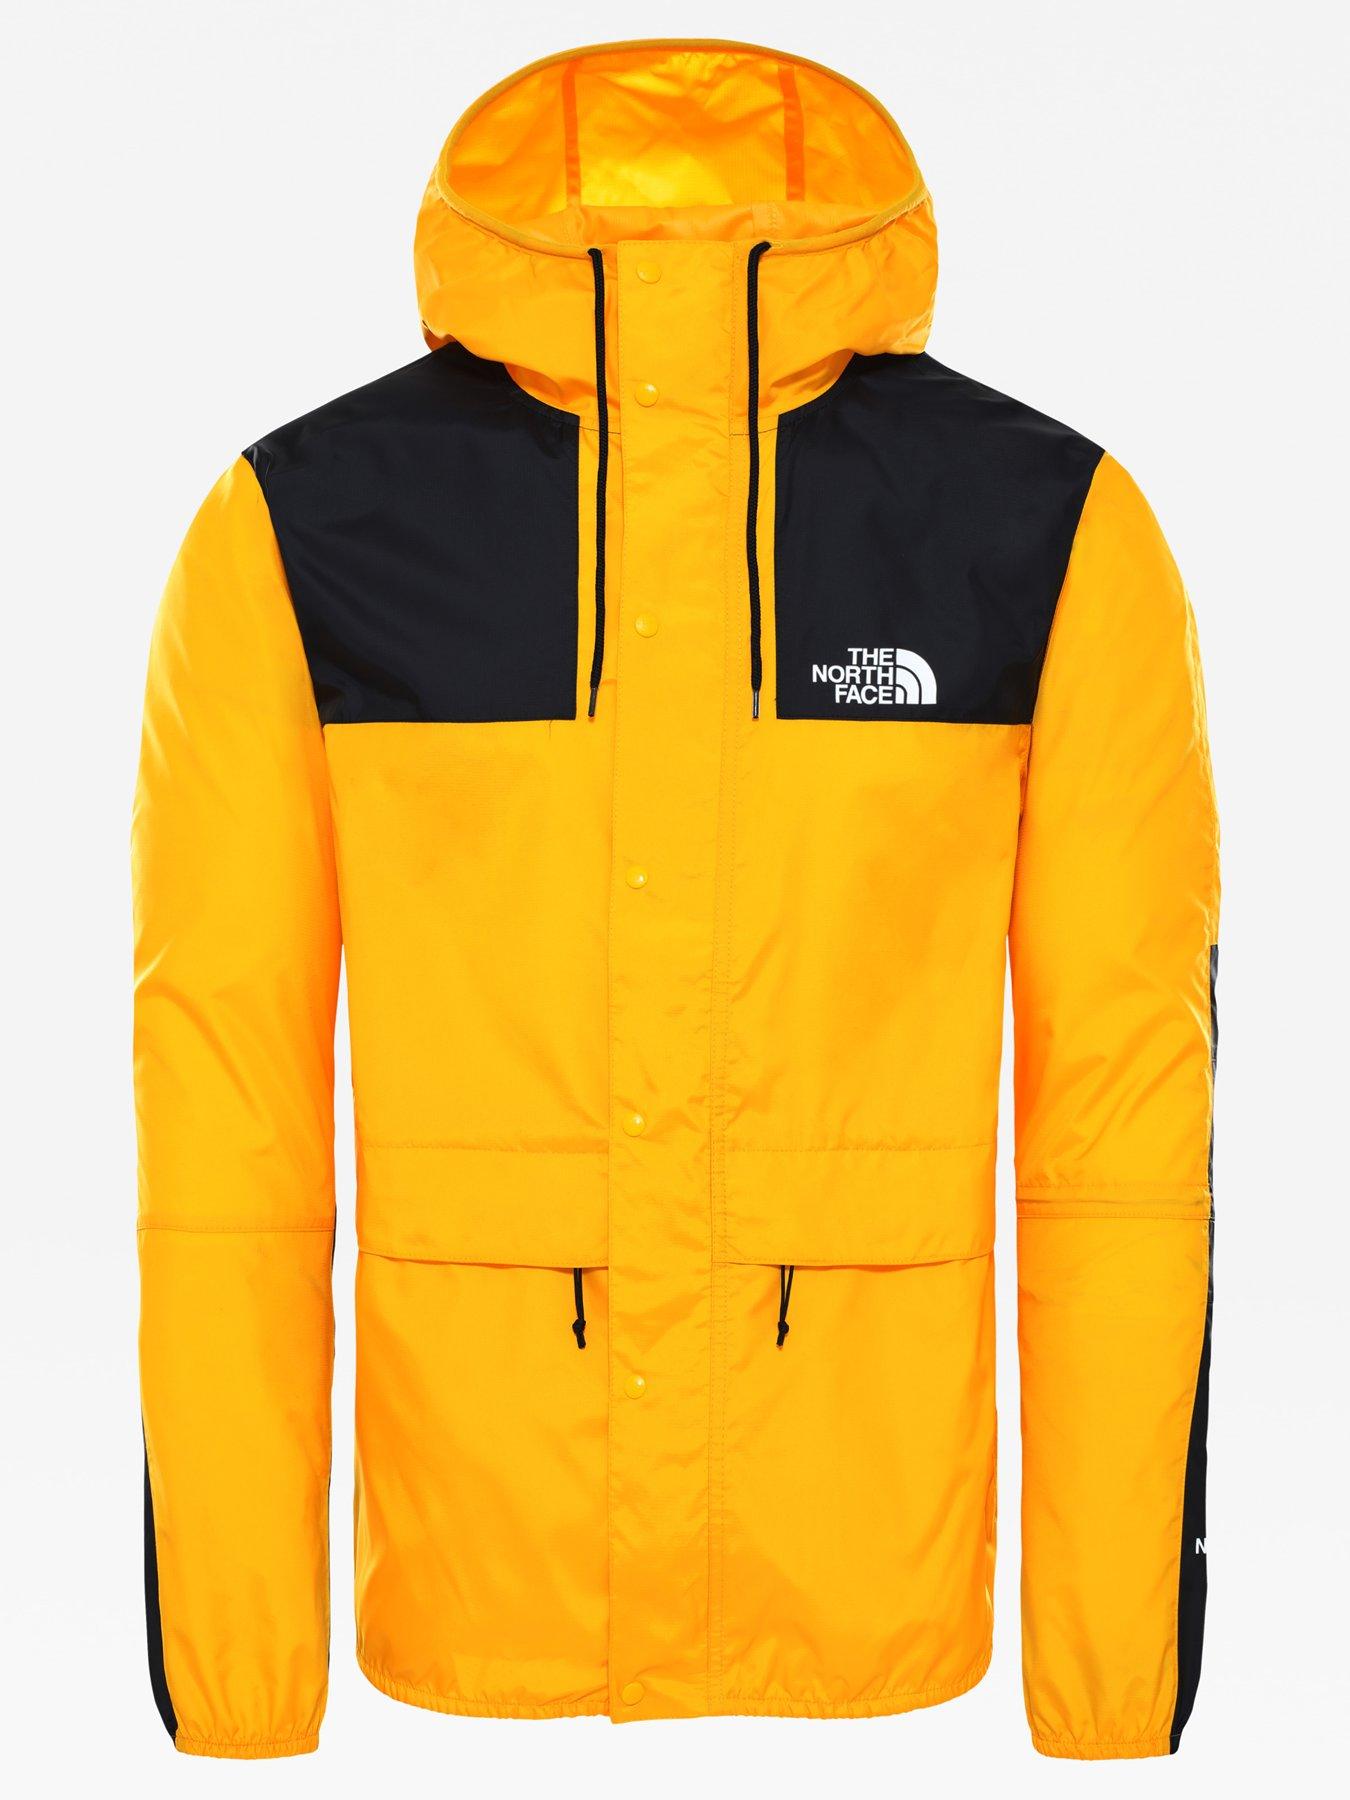 1985 mountain jacket north face